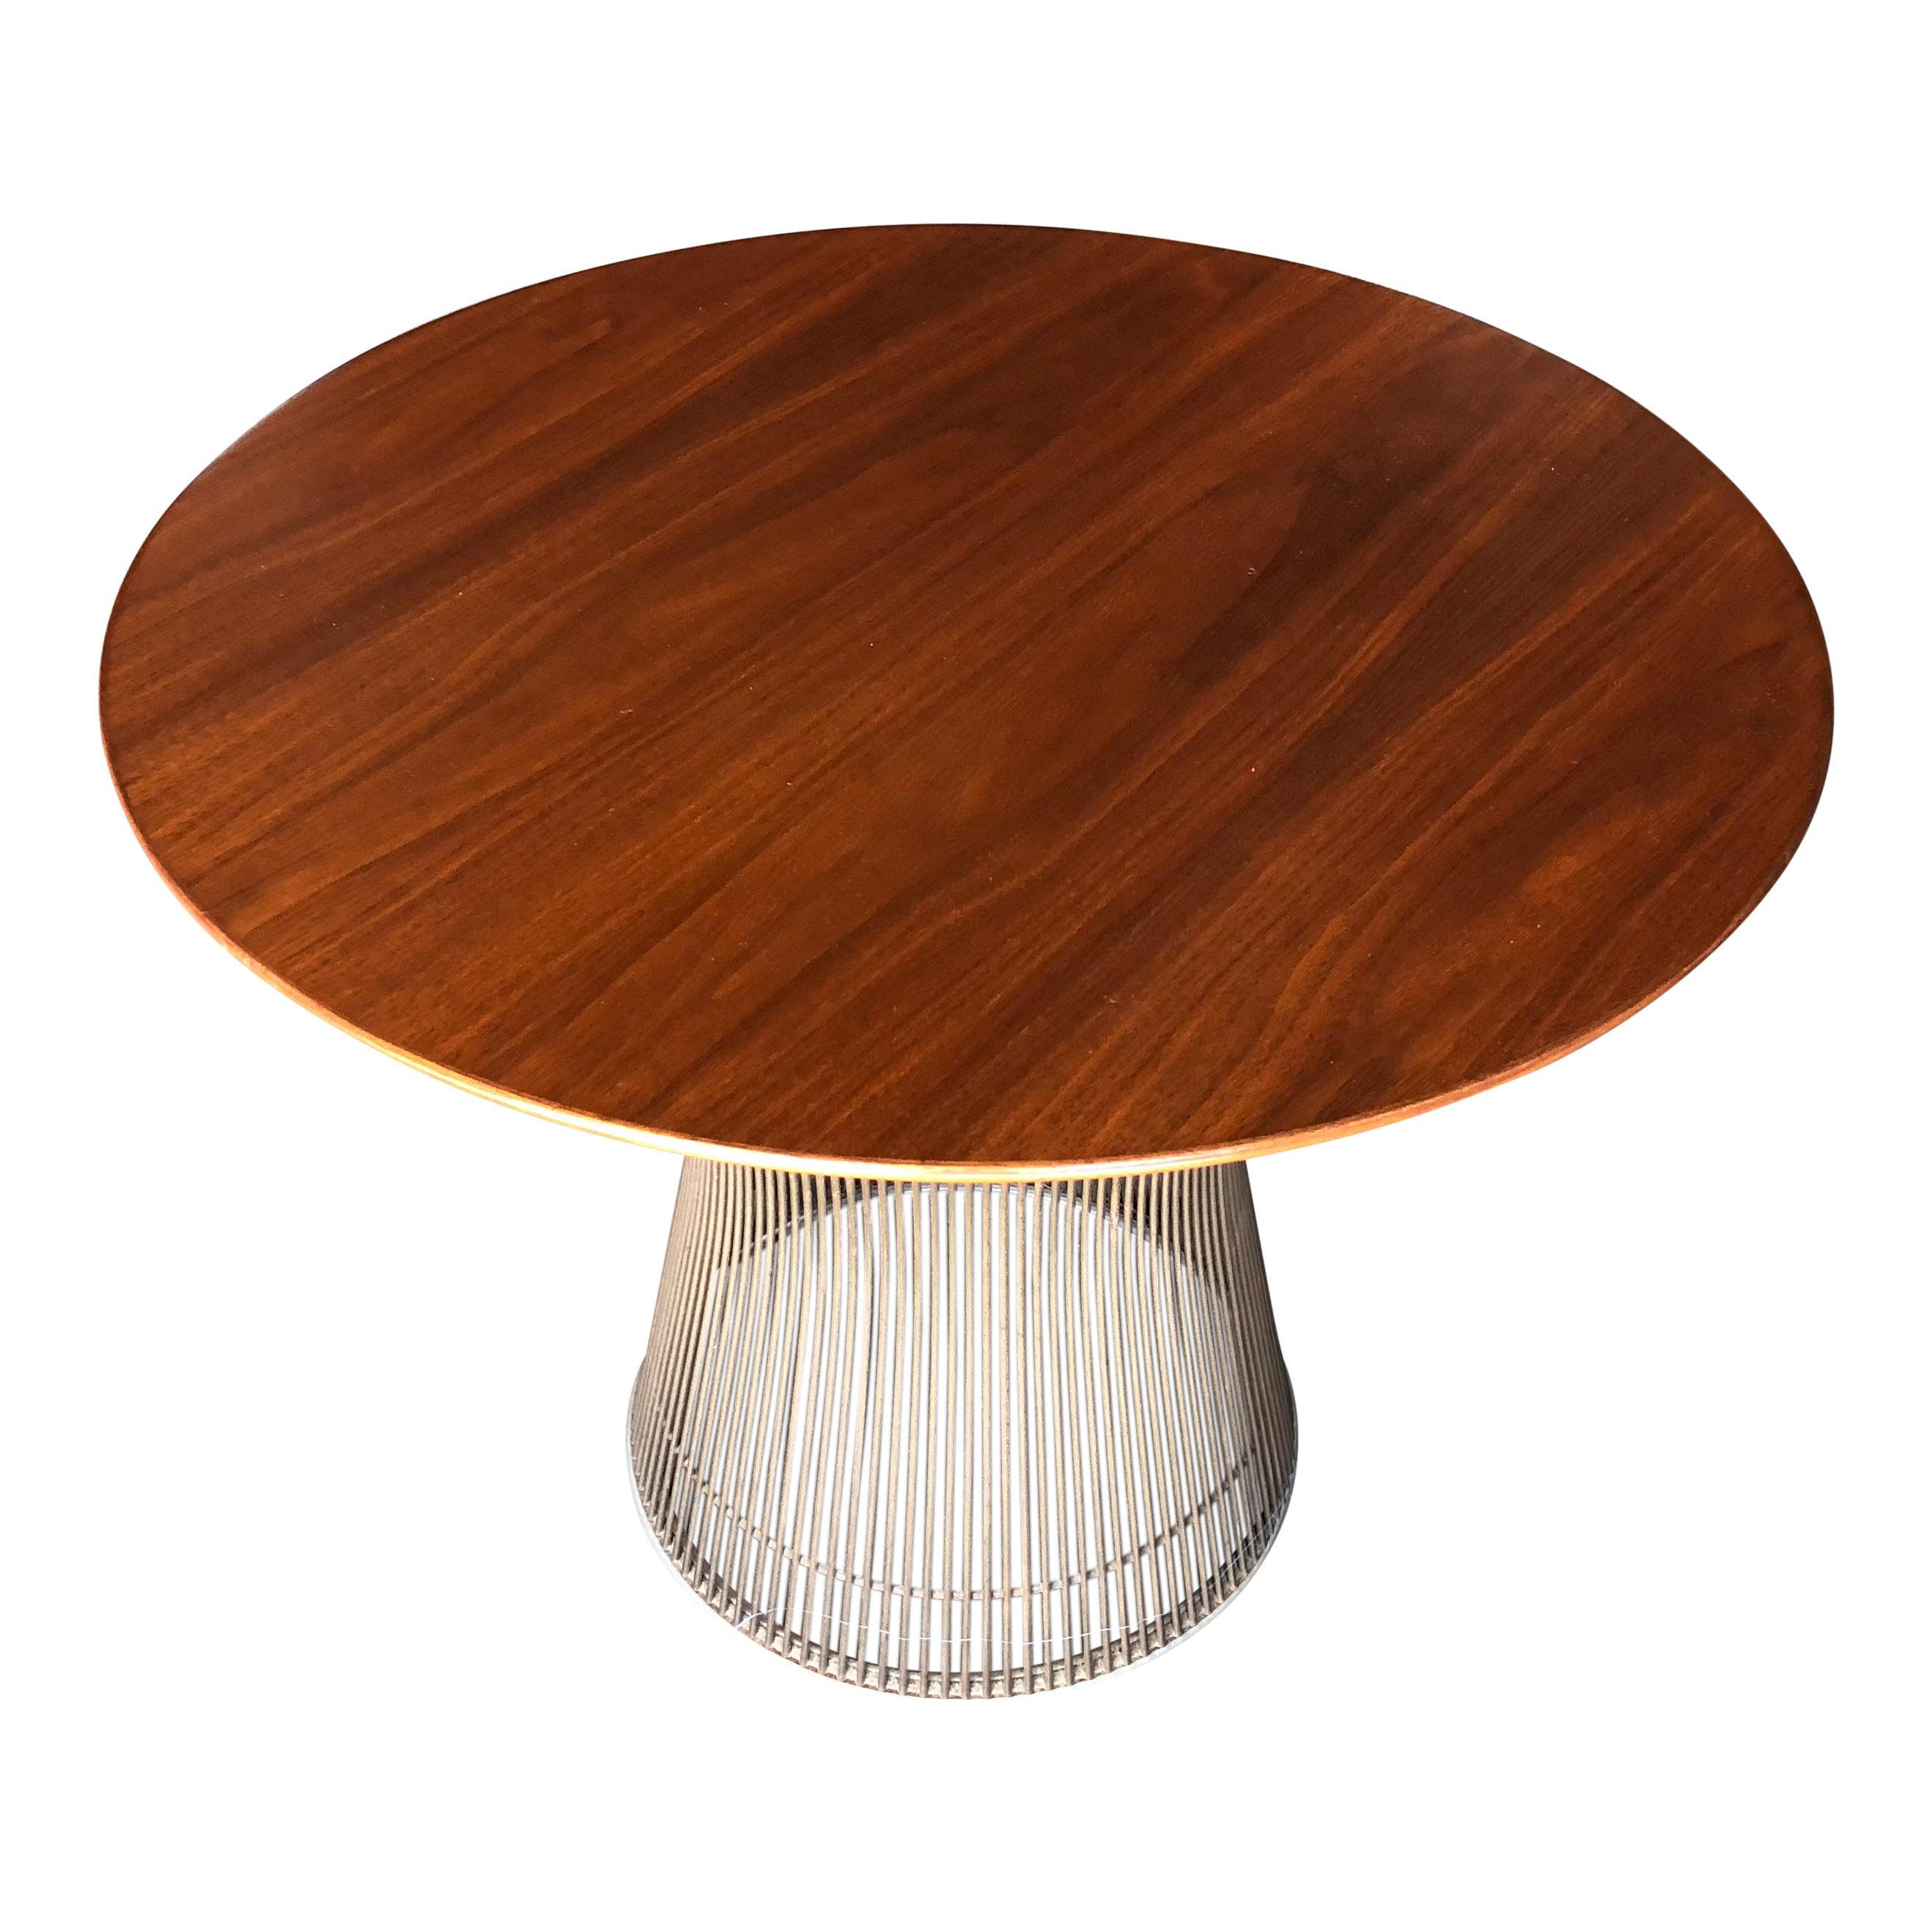 For your consideration is an icon of Mid-Century Modern design, the Warren Platner for Knoll side table with a walnut top.

Platner revolutionized design with his playful wire series, at once both structure and sculpture.

This particular